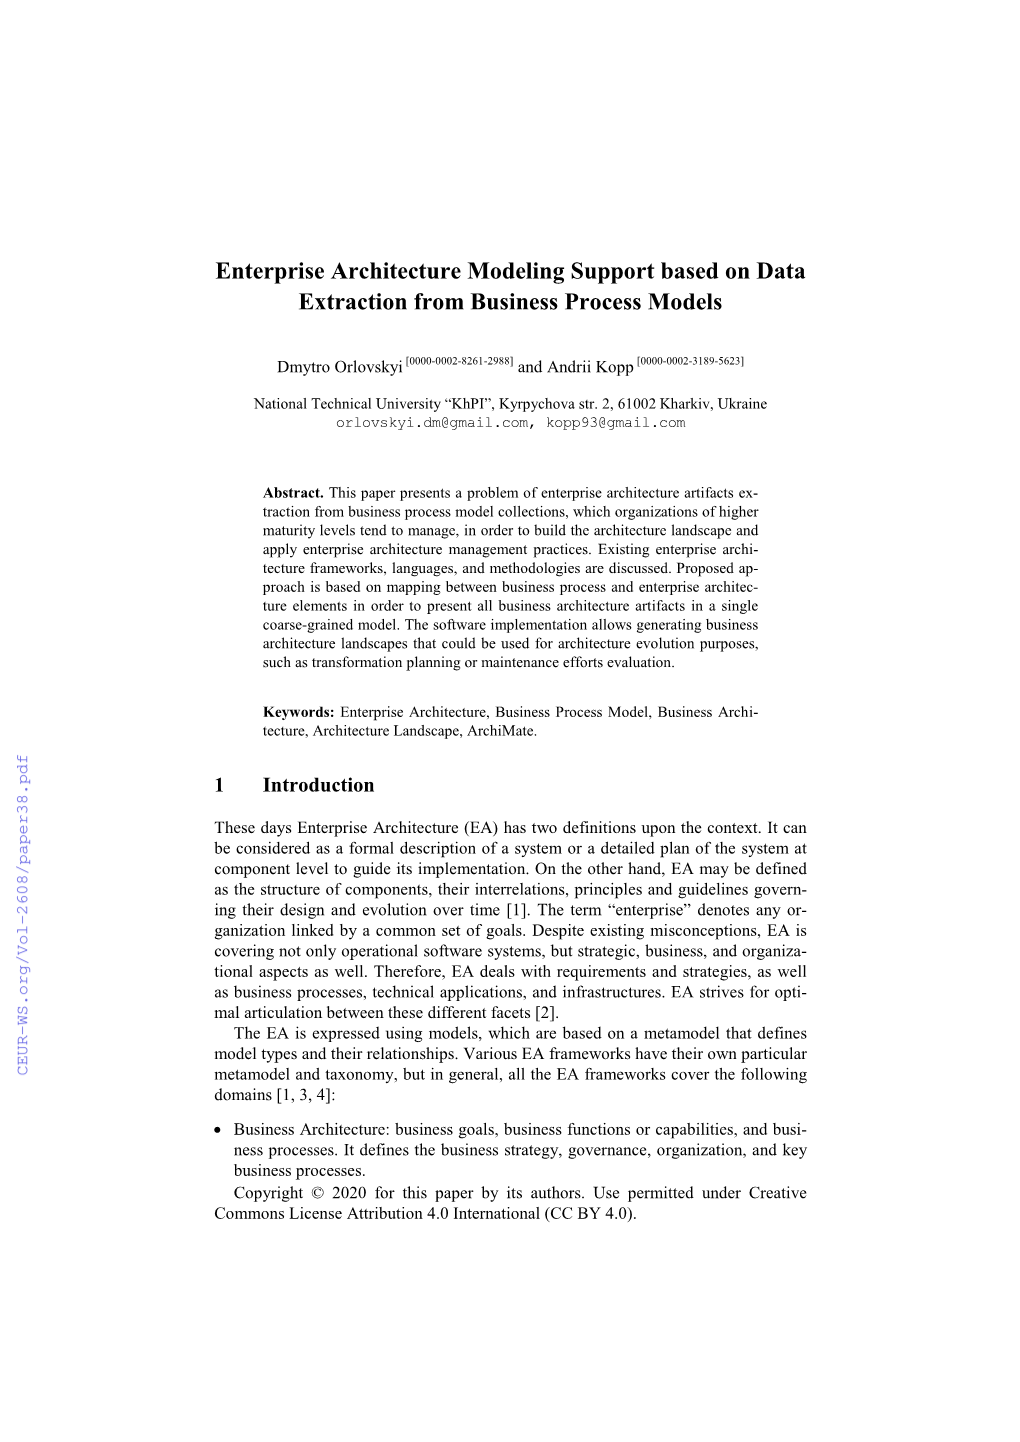 Enterprise Architecture Modeling Support Based on Data Extraction from Business Process Models